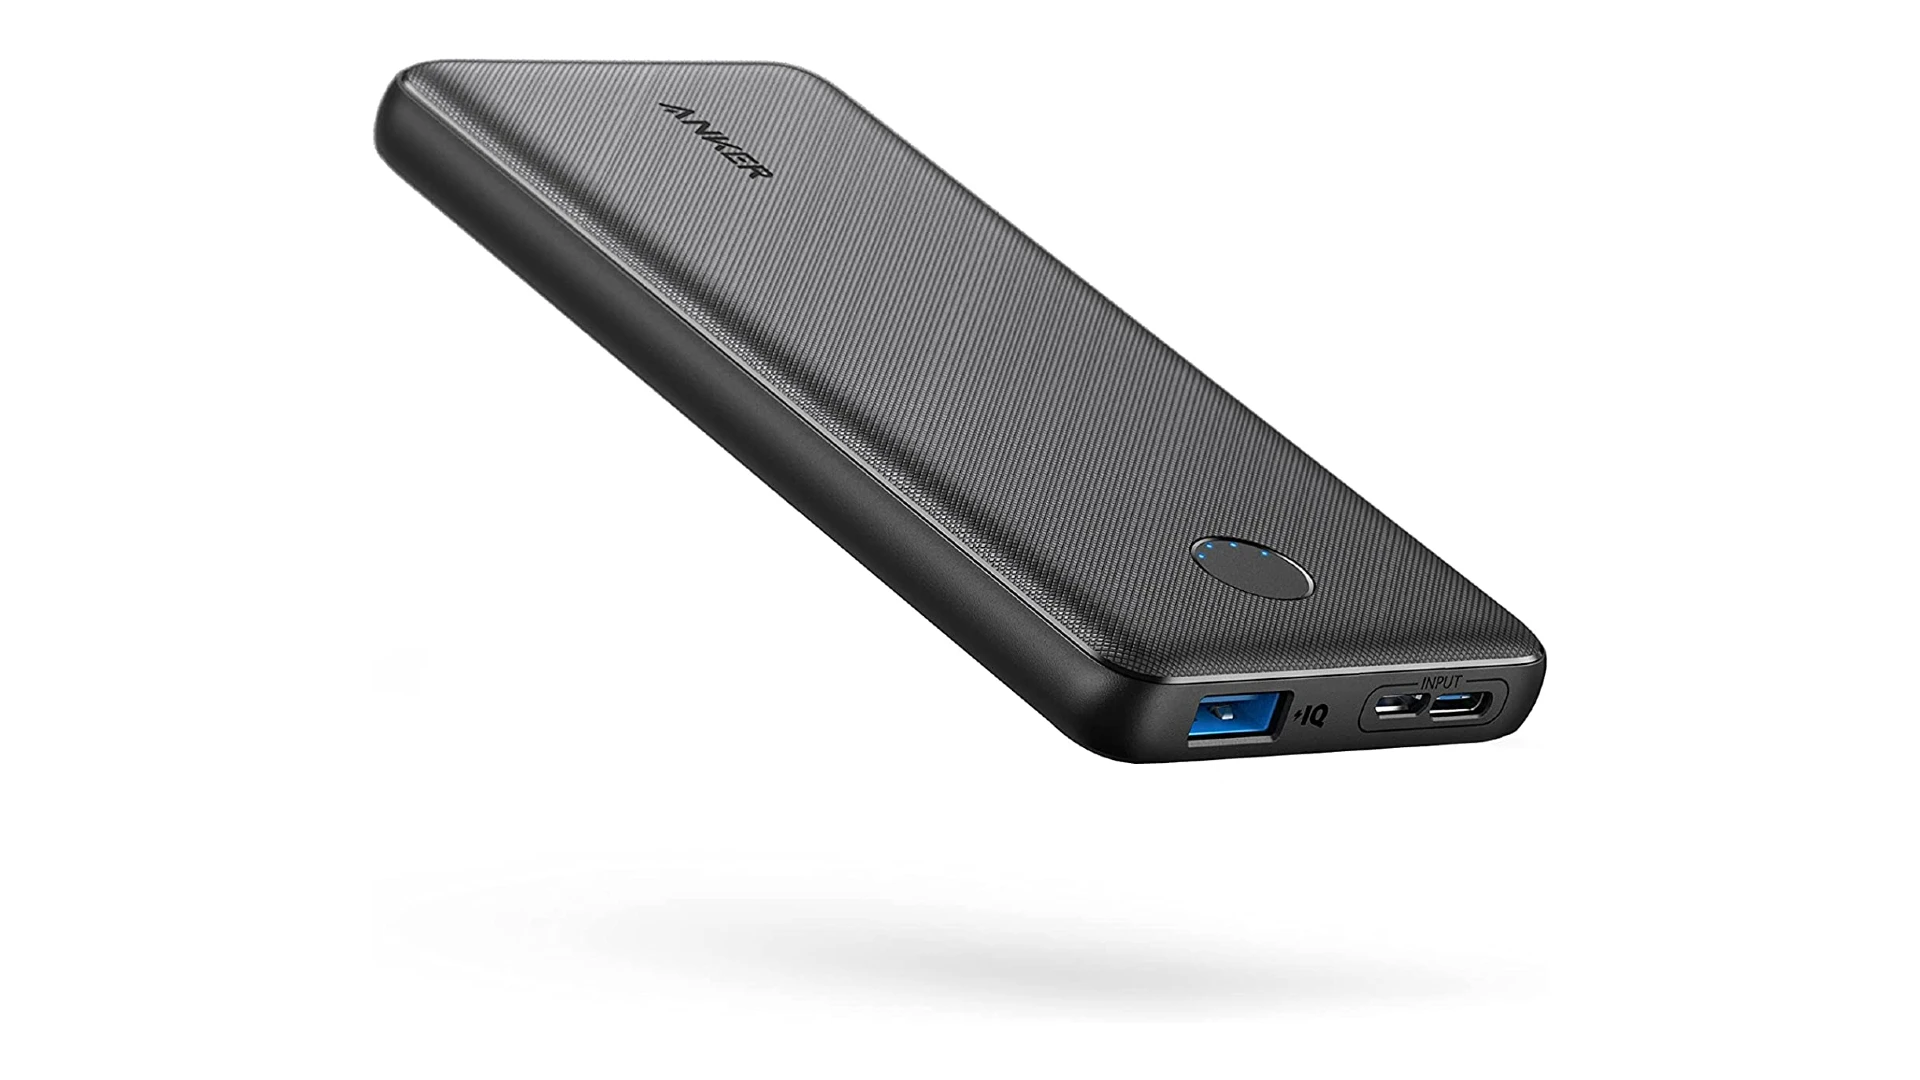 THE POWER BANK 3I FEATURES 18W QUICK CHARGING